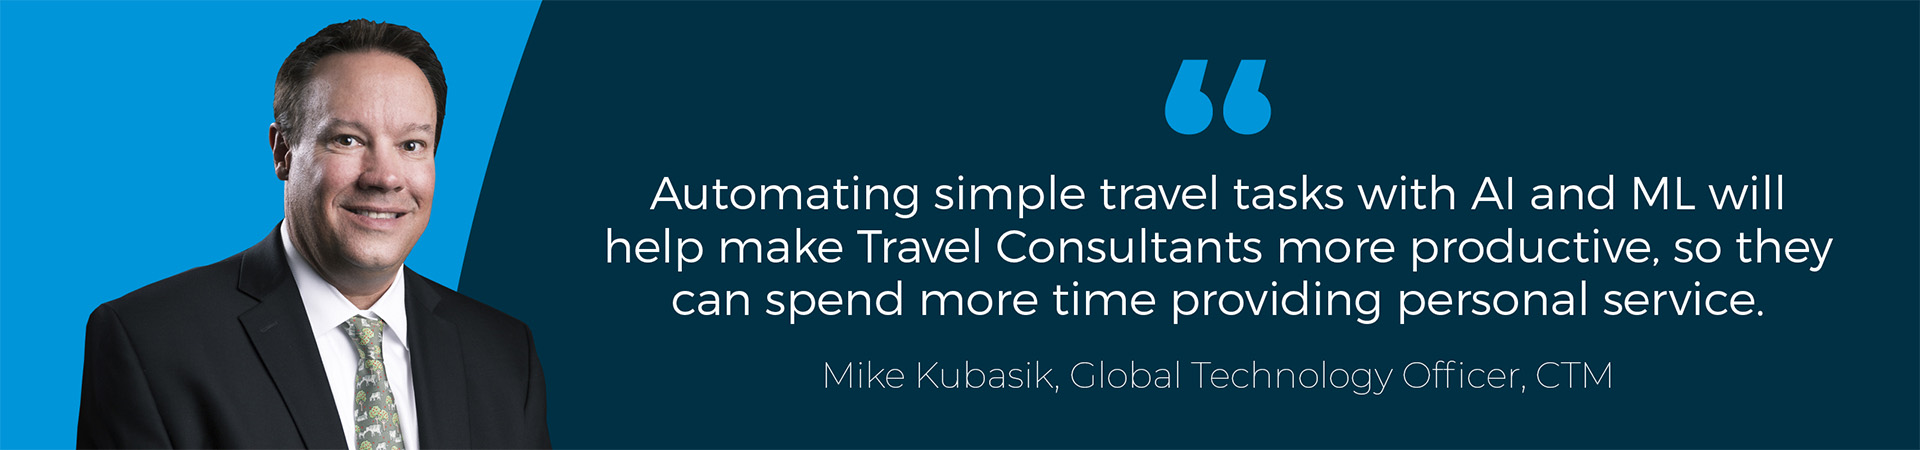 Banner - "Automating simple travel tasks with AI and ML will help make Travel Consultants more productive, so they can spend more time providing personal service" Mike Kubasik quote